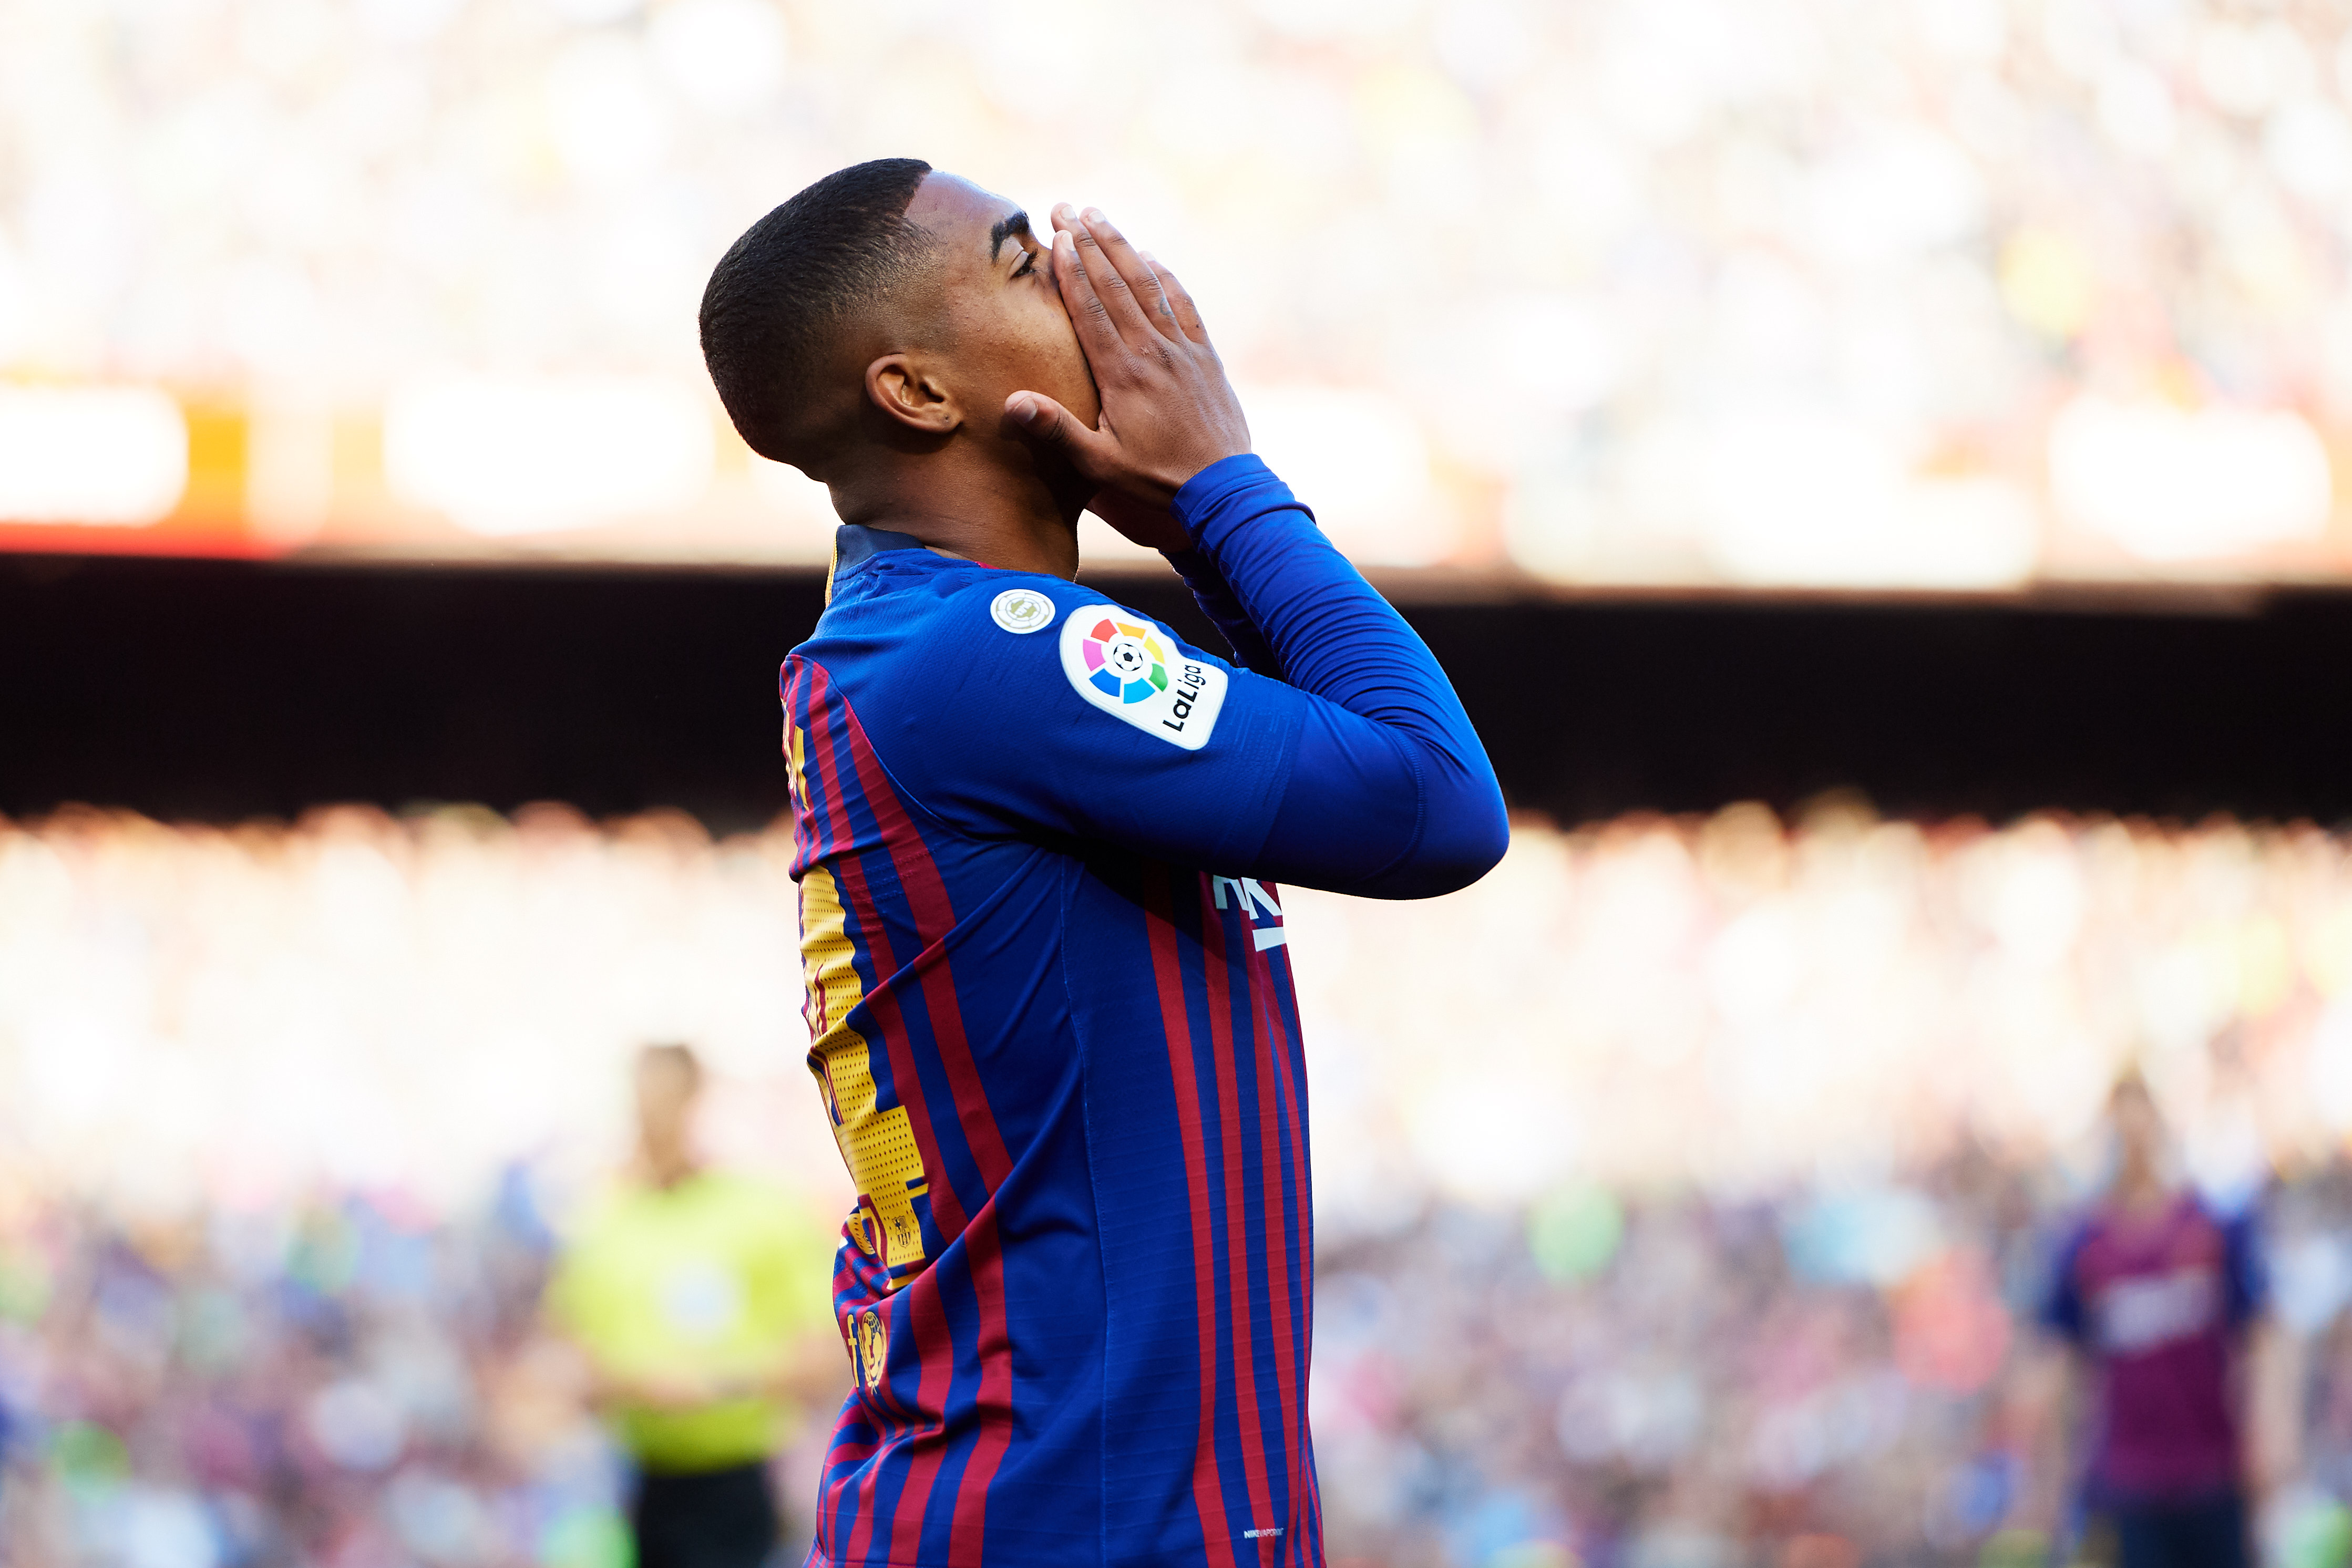 BARCELONA, SPAIN - MARCH 30: Malcom of FC Barcelona reacts during the La Liga match between FC Barcelona and RCD Espanyol at Camp Nou on March 30, 2019 in Barcelona, Spain. (Photo by Alex Caparros/Getty Images)